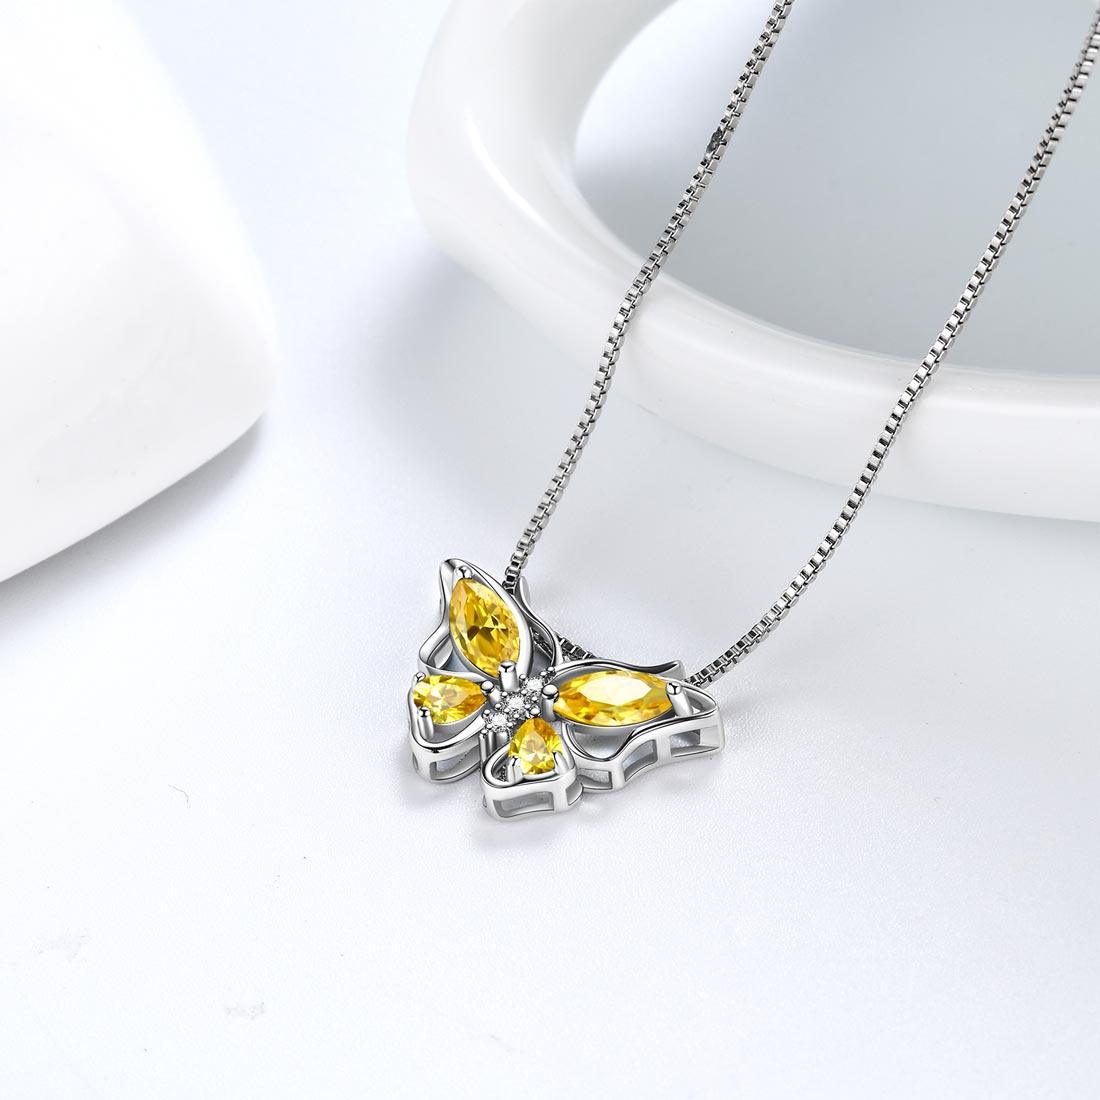 Butterfly Pendant Necklace Birthstone November Citrine - Necklaces - Aurora Tears